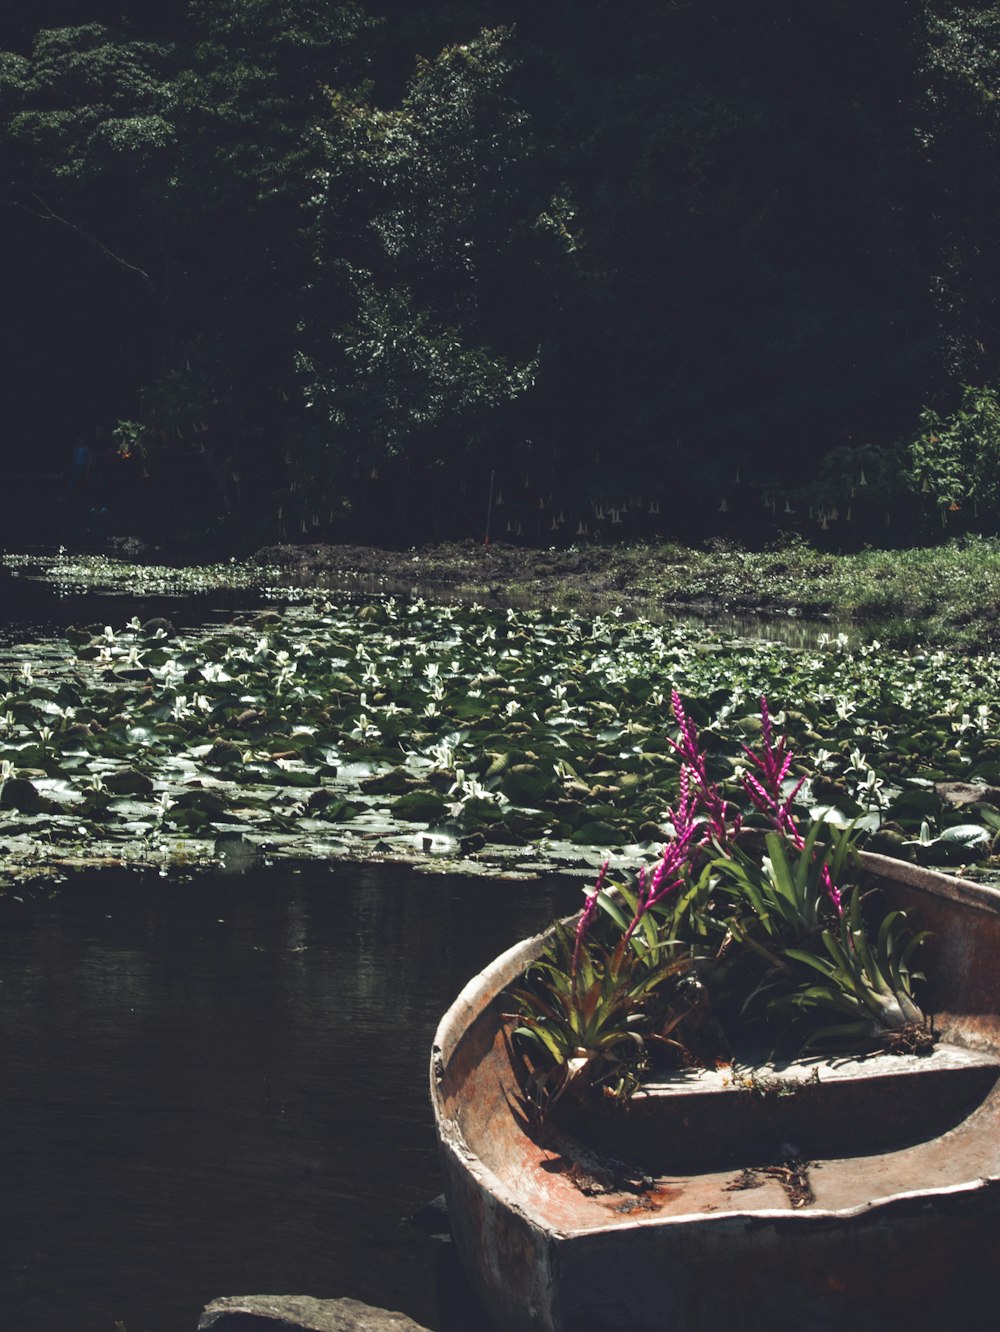 a planter with flowers in it by a body of water